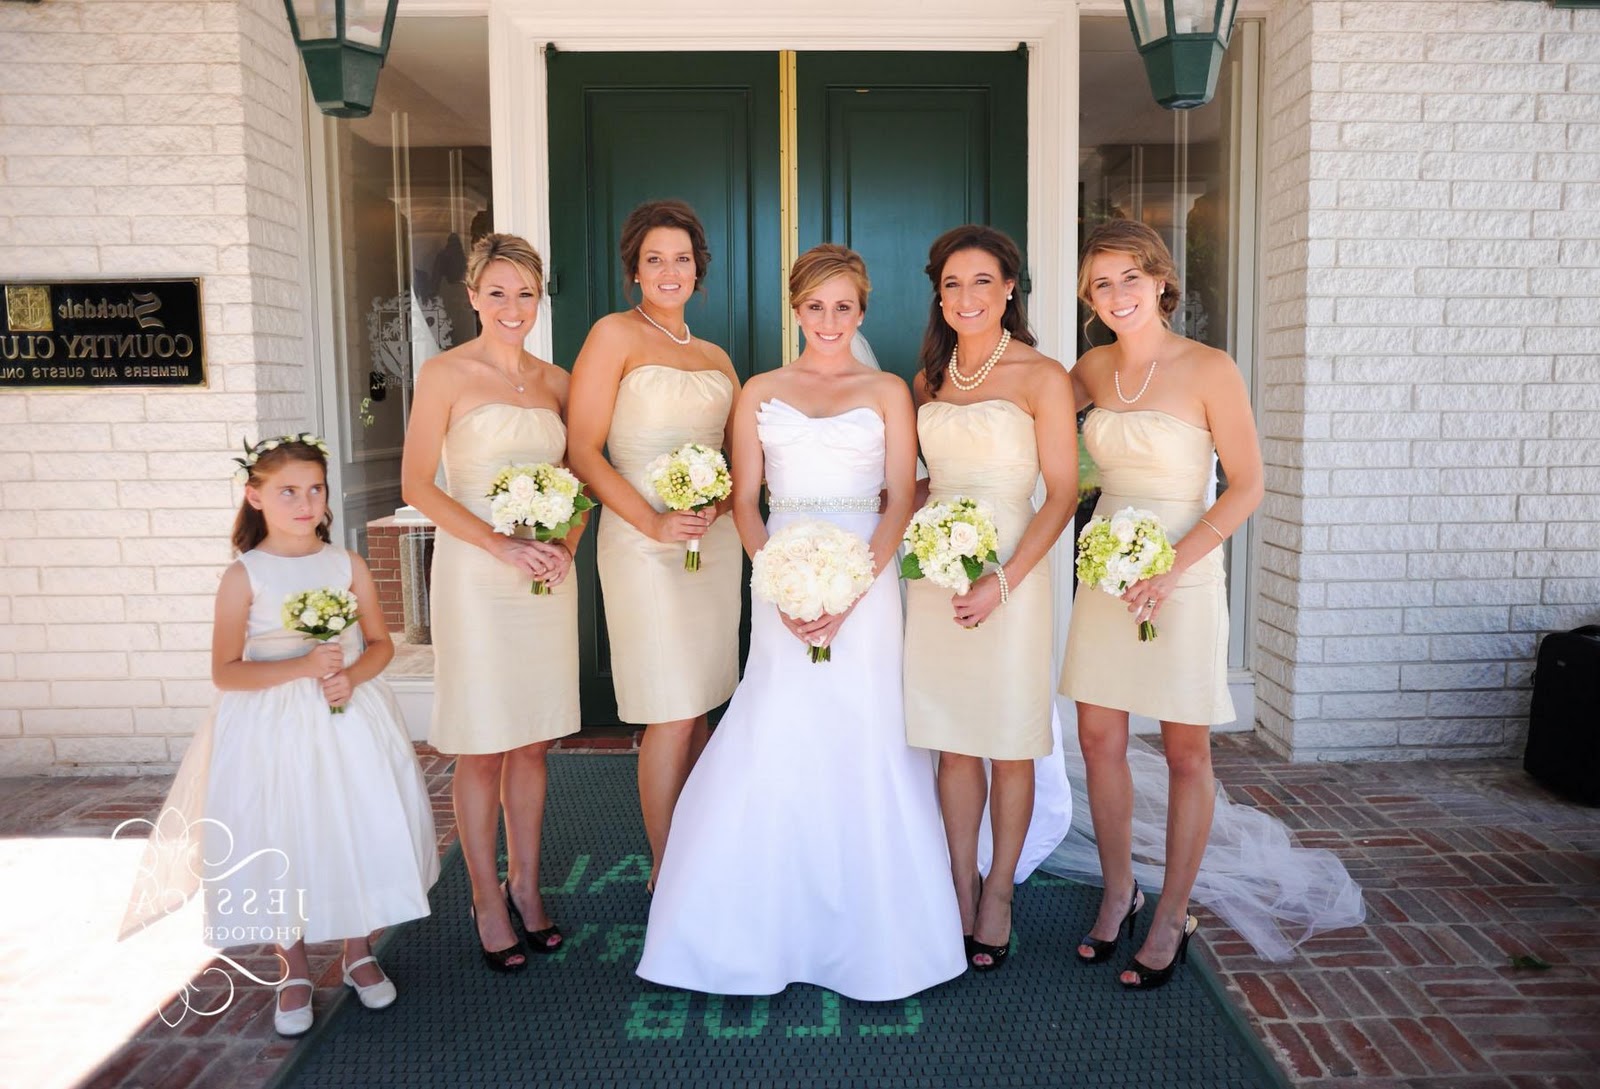 Short Champagne bridesmaid dresses with green and champagne bouquet and